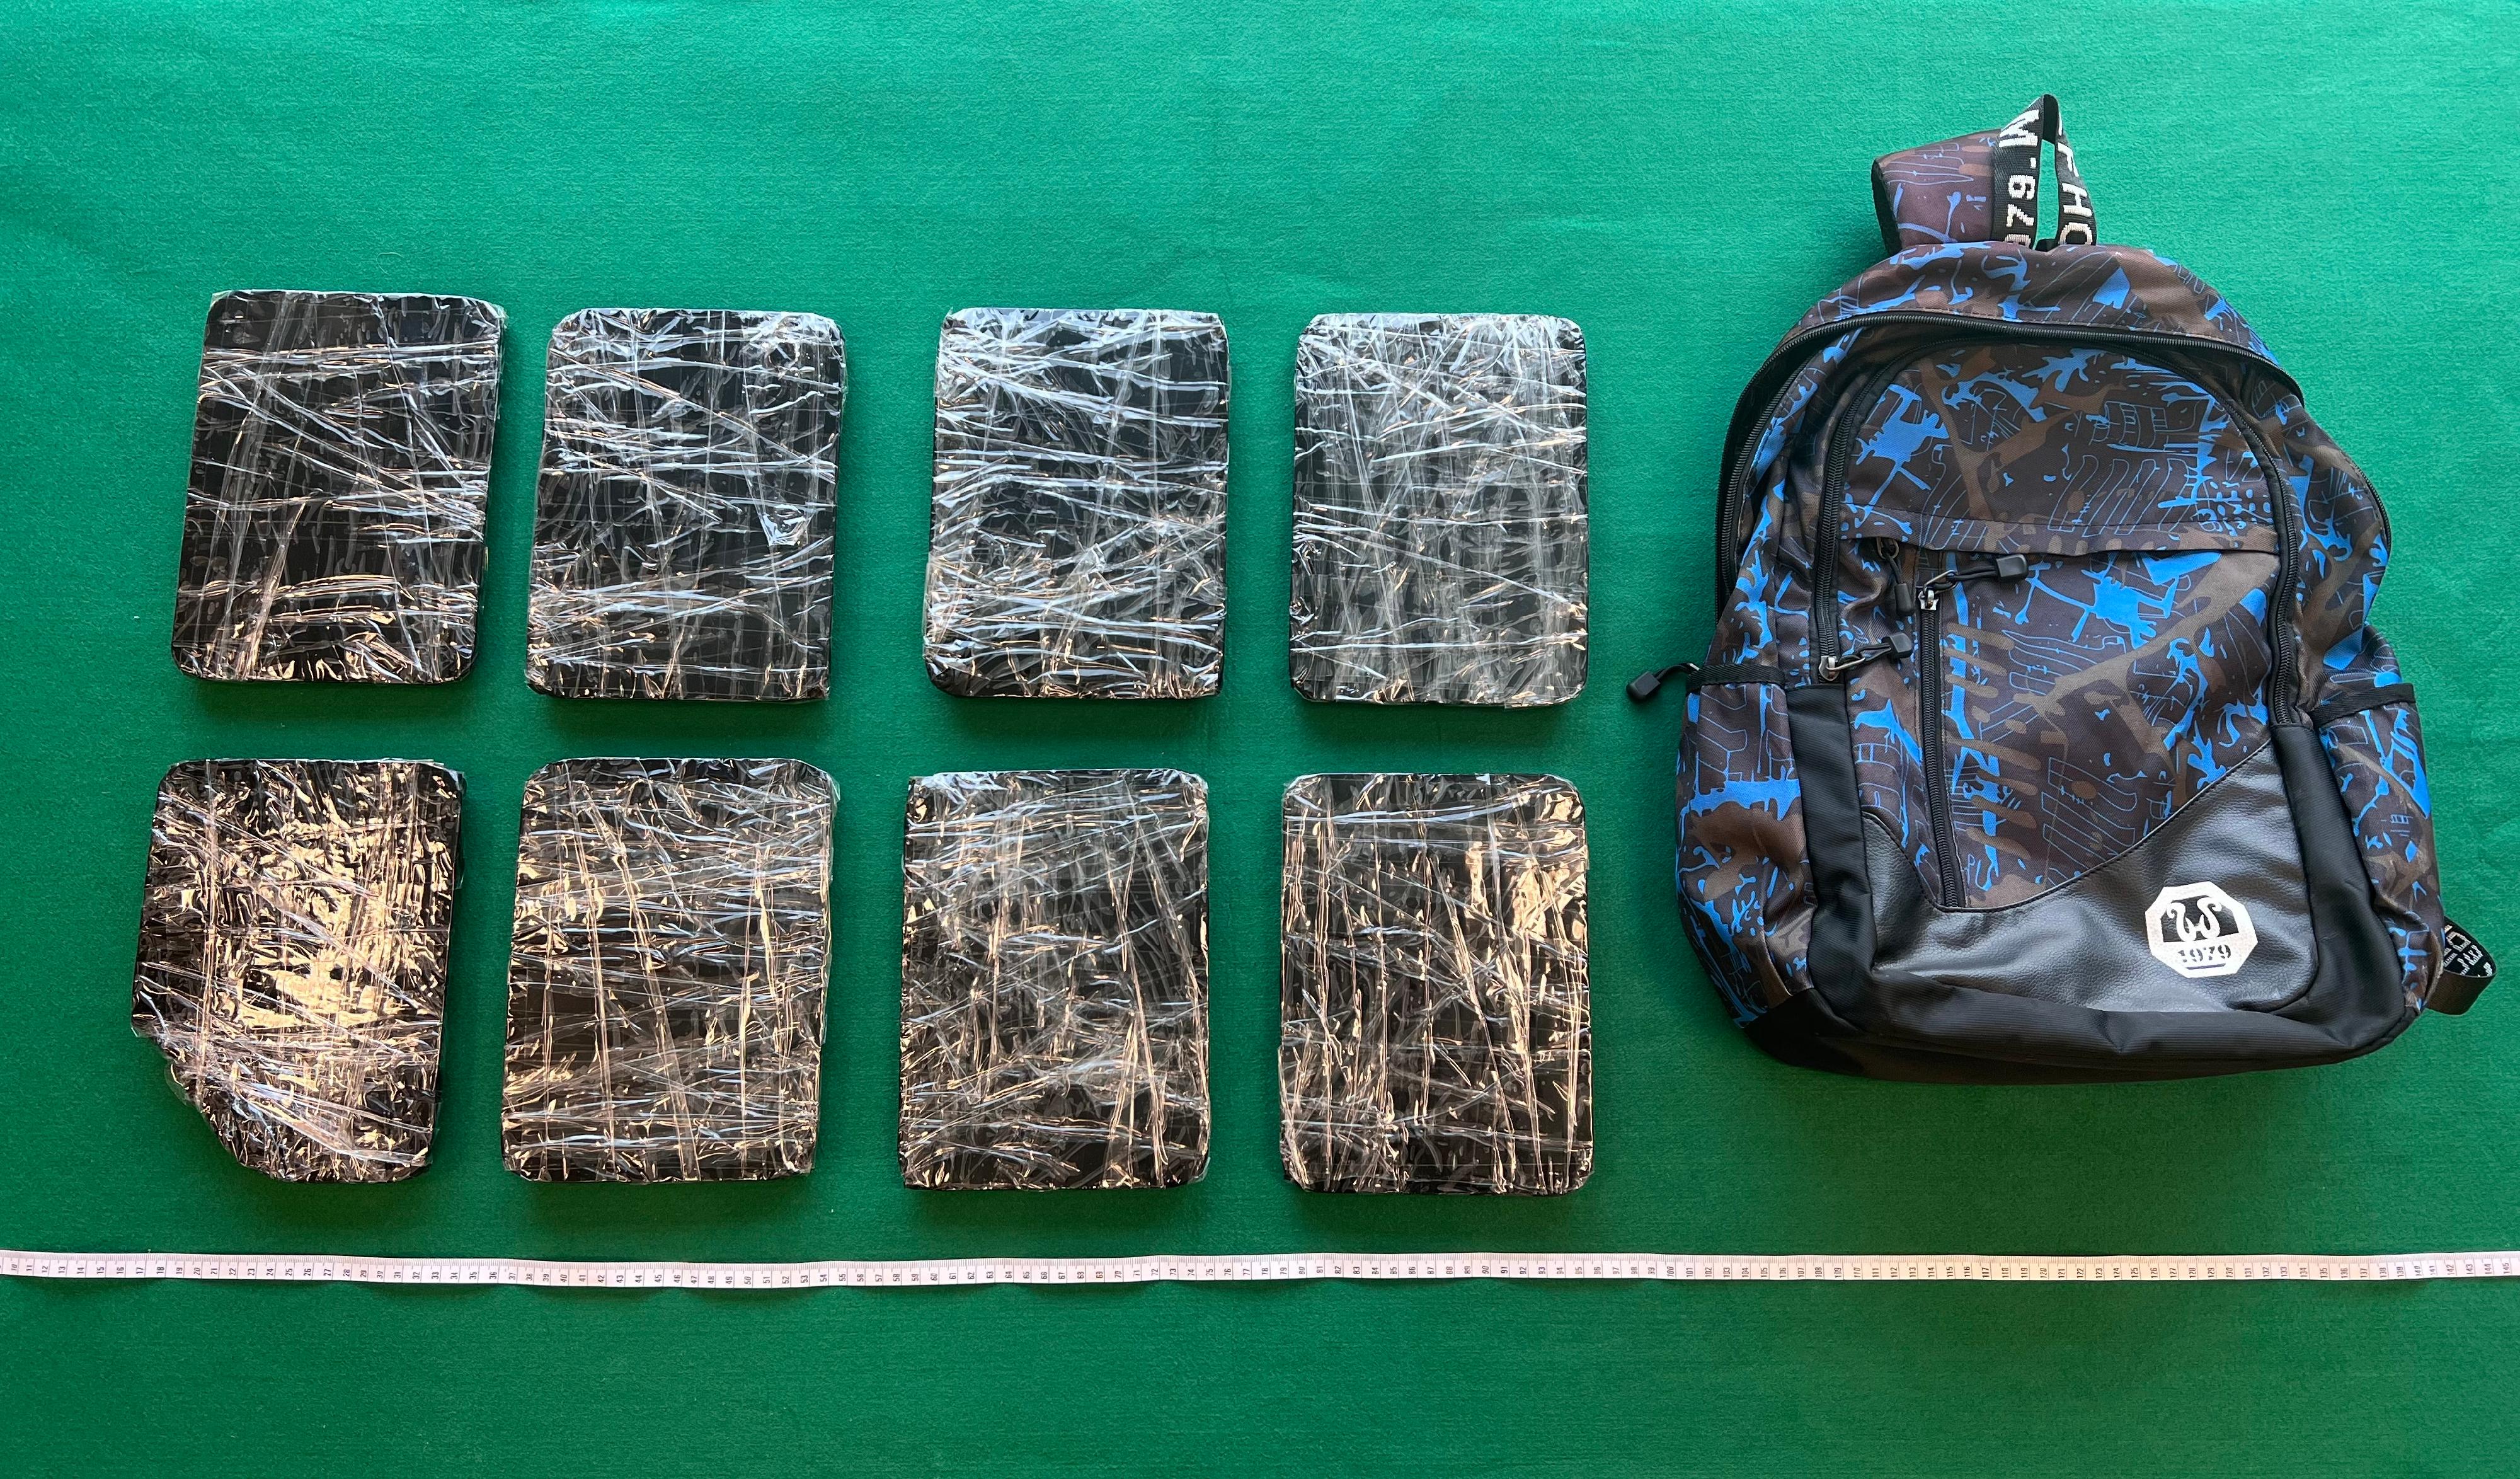 Hong Kong Customs yesterday (March 7) seized about 8 kilograms of suspected ketamine with an estimated market value of about $4.7 million in Kowloon City. A man was arrested. Photo shows the suspected ketamine seized from the backpack of the arrested man.